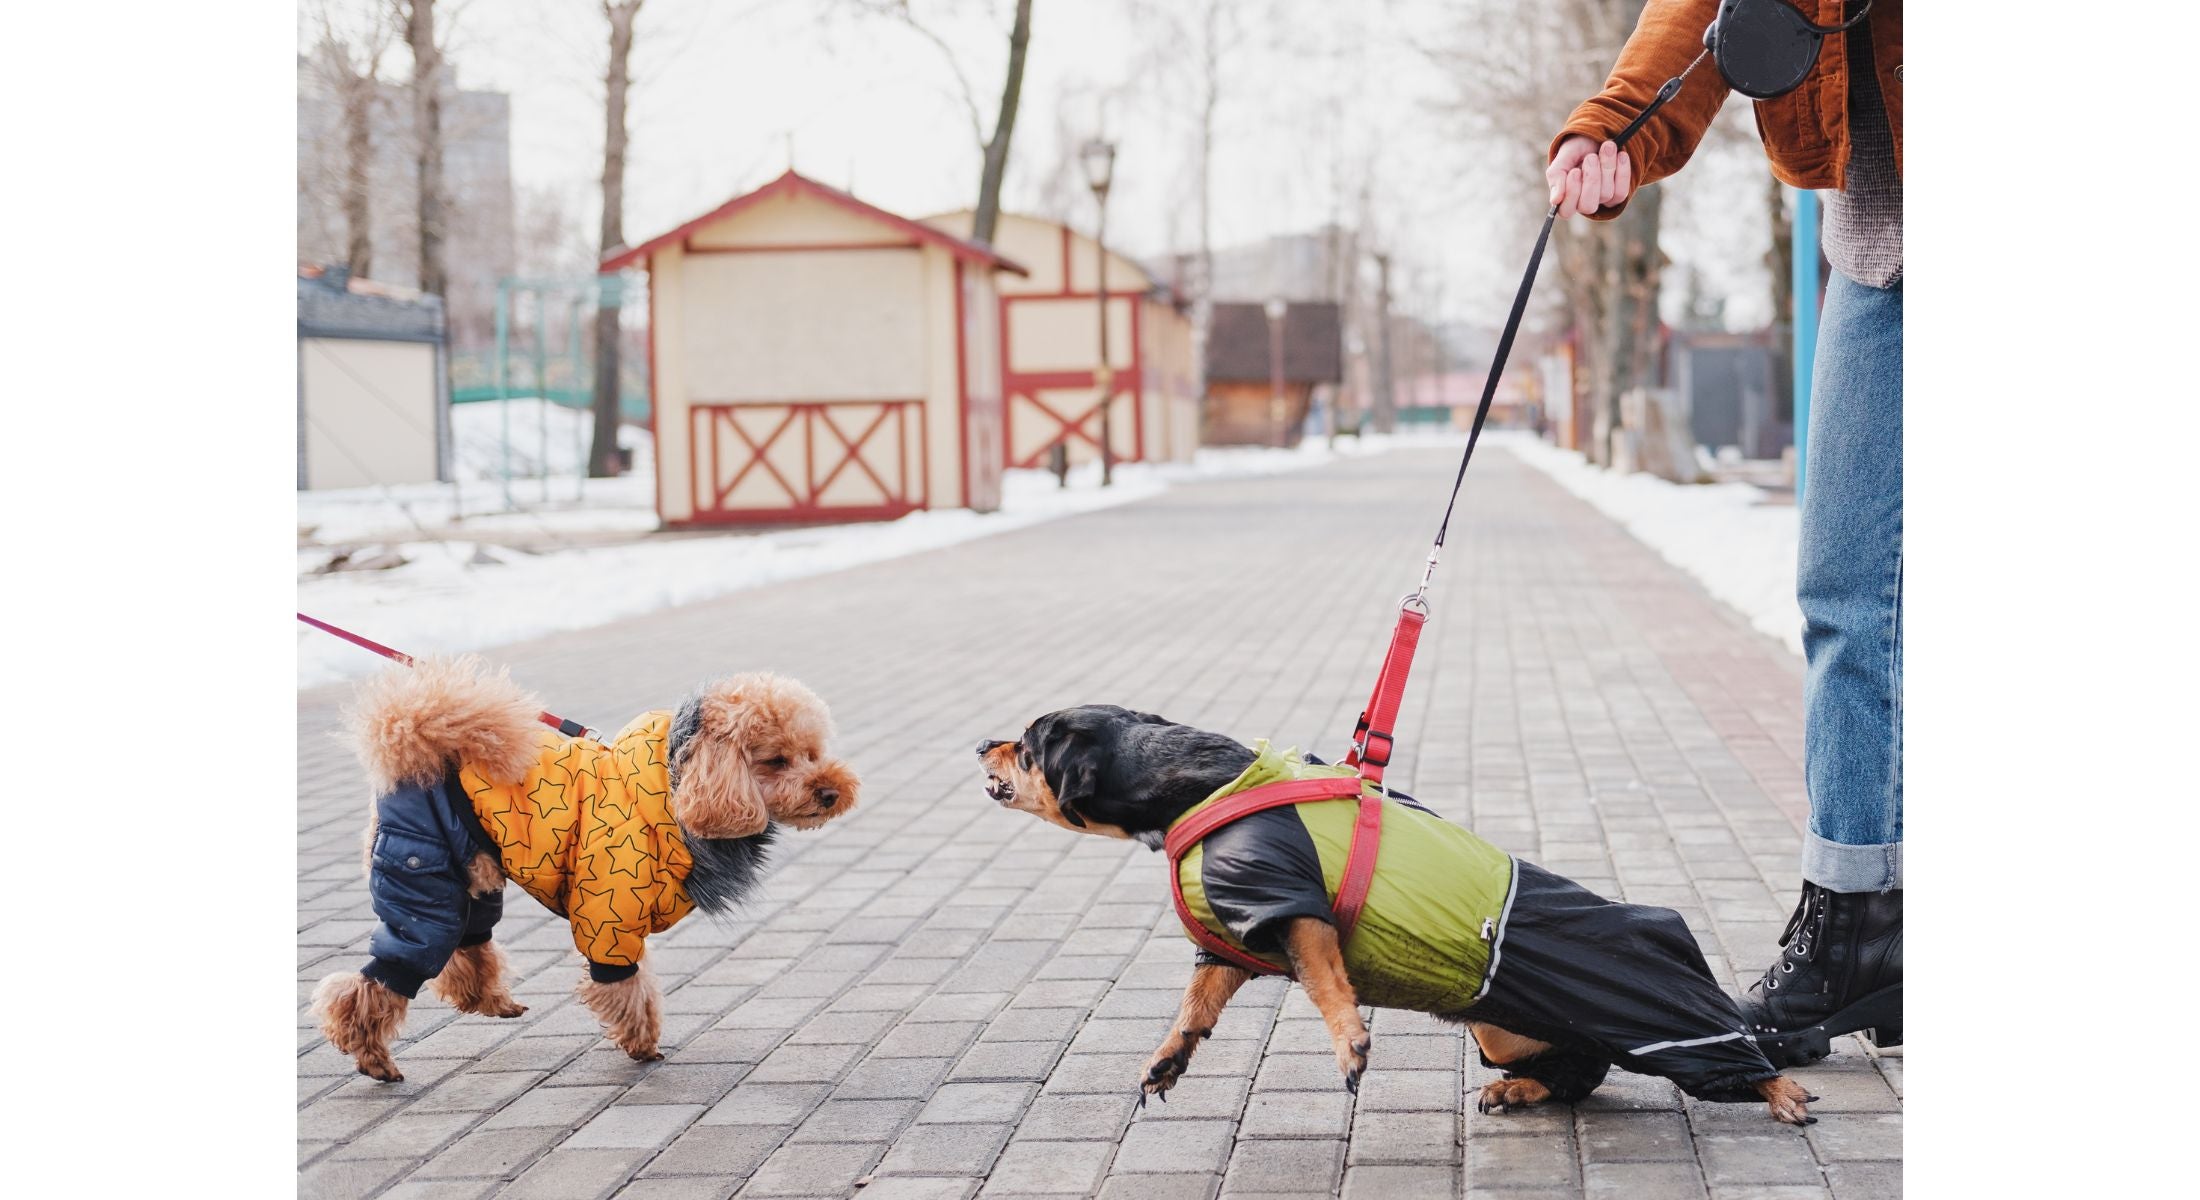 an apricot poodle being confronted by another similar size black and brown dog that is lunging and growling at the poodle.